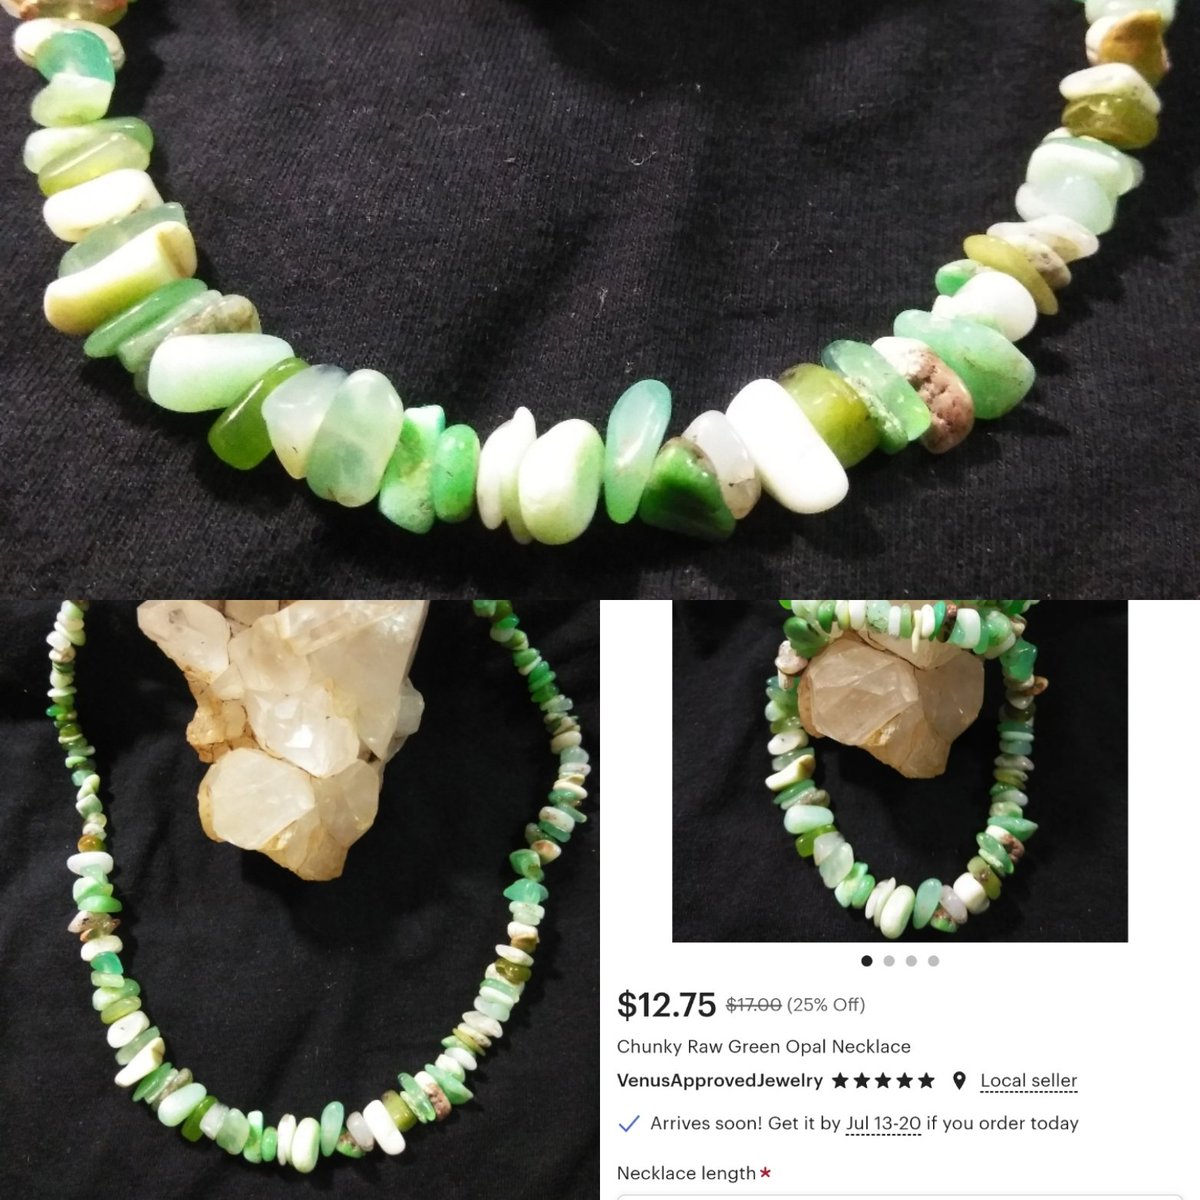 A perfect #chunkyrawopalnecklace  for sale for y'all!
etsy.com/listing/107618…
#opaljewelry #opalnecklace #stonenecklace #rawnecklace #etsyshop #etsyseller #etsystore #chunkyjewelry #chunkynecklaces #greenopalnecklace #chunkynecklacw